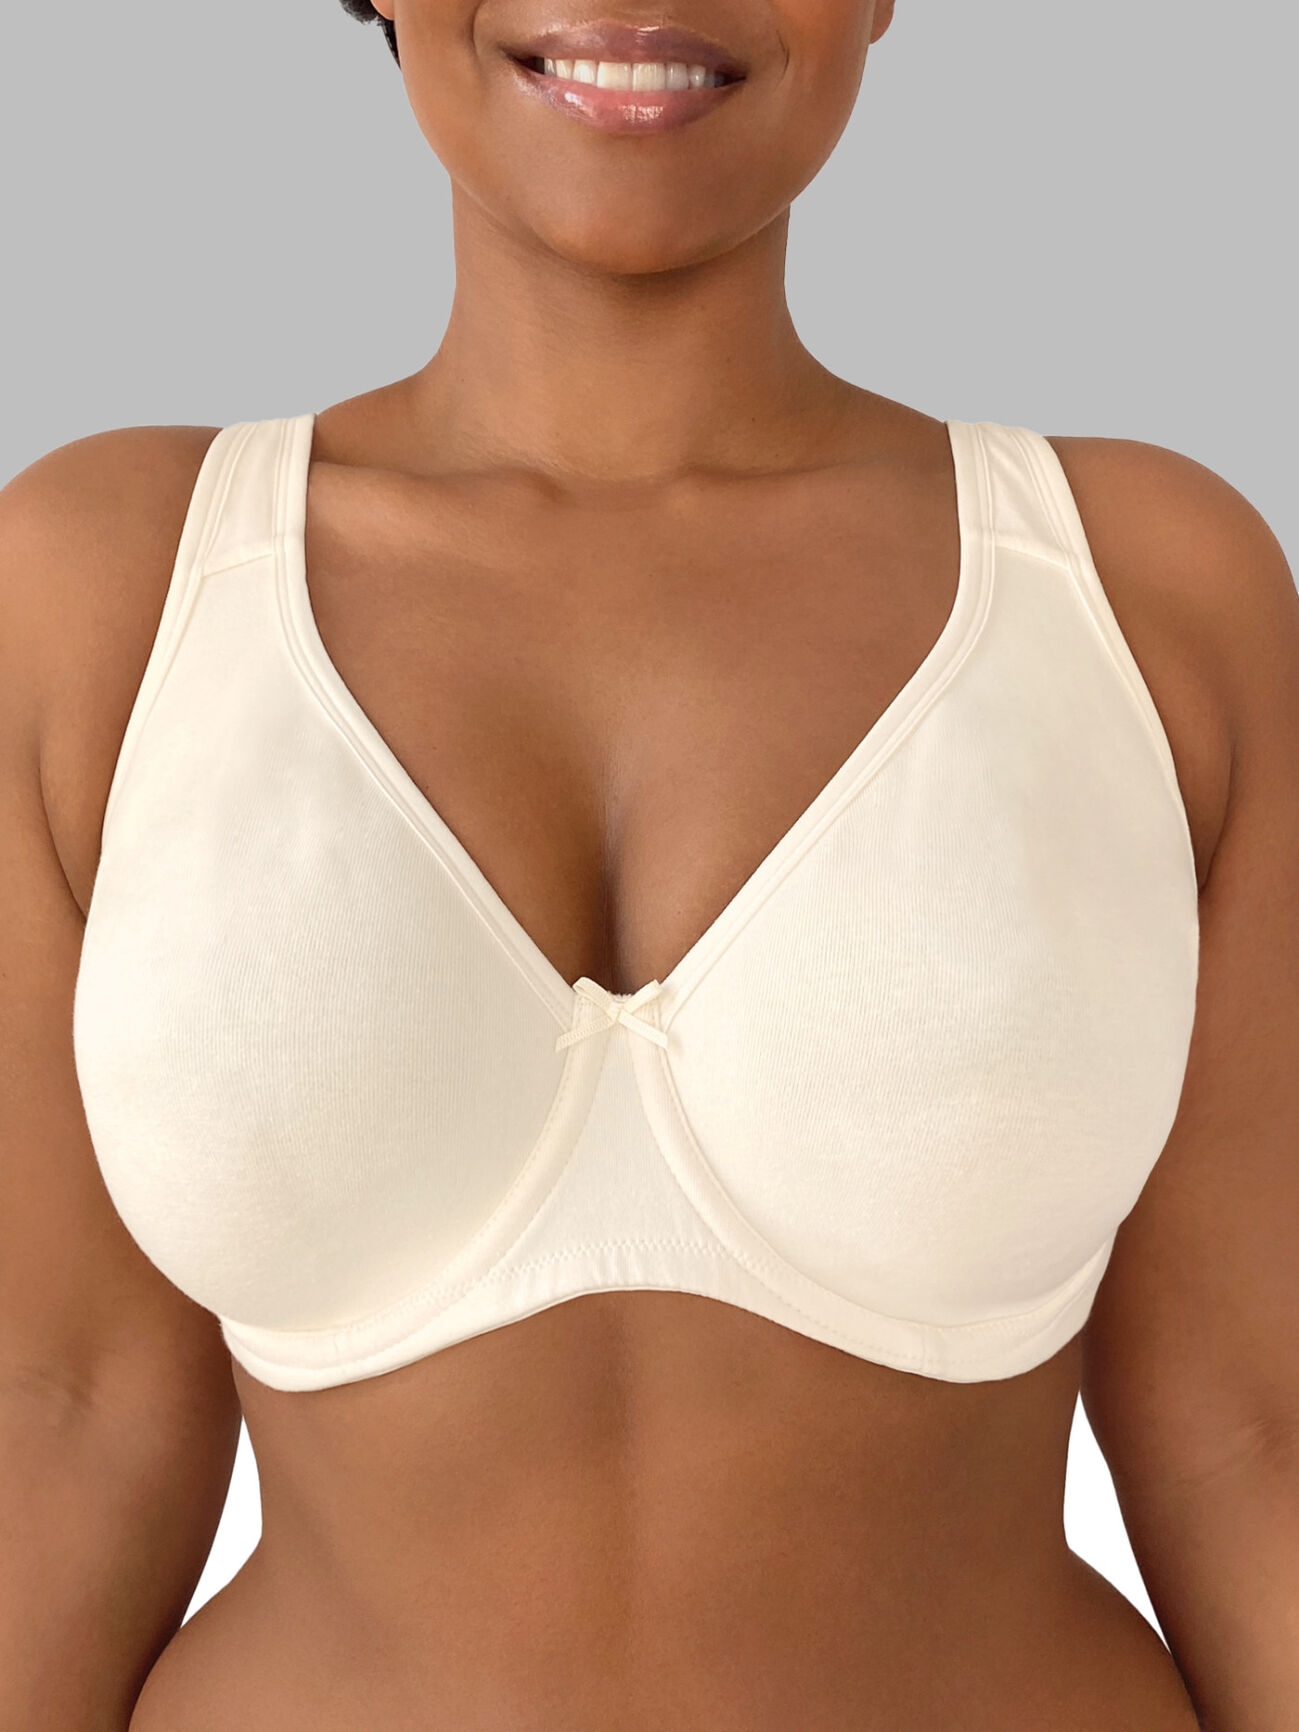 Women's Bra Plus Size Smooth Underwire Non Padded Full Coverage T